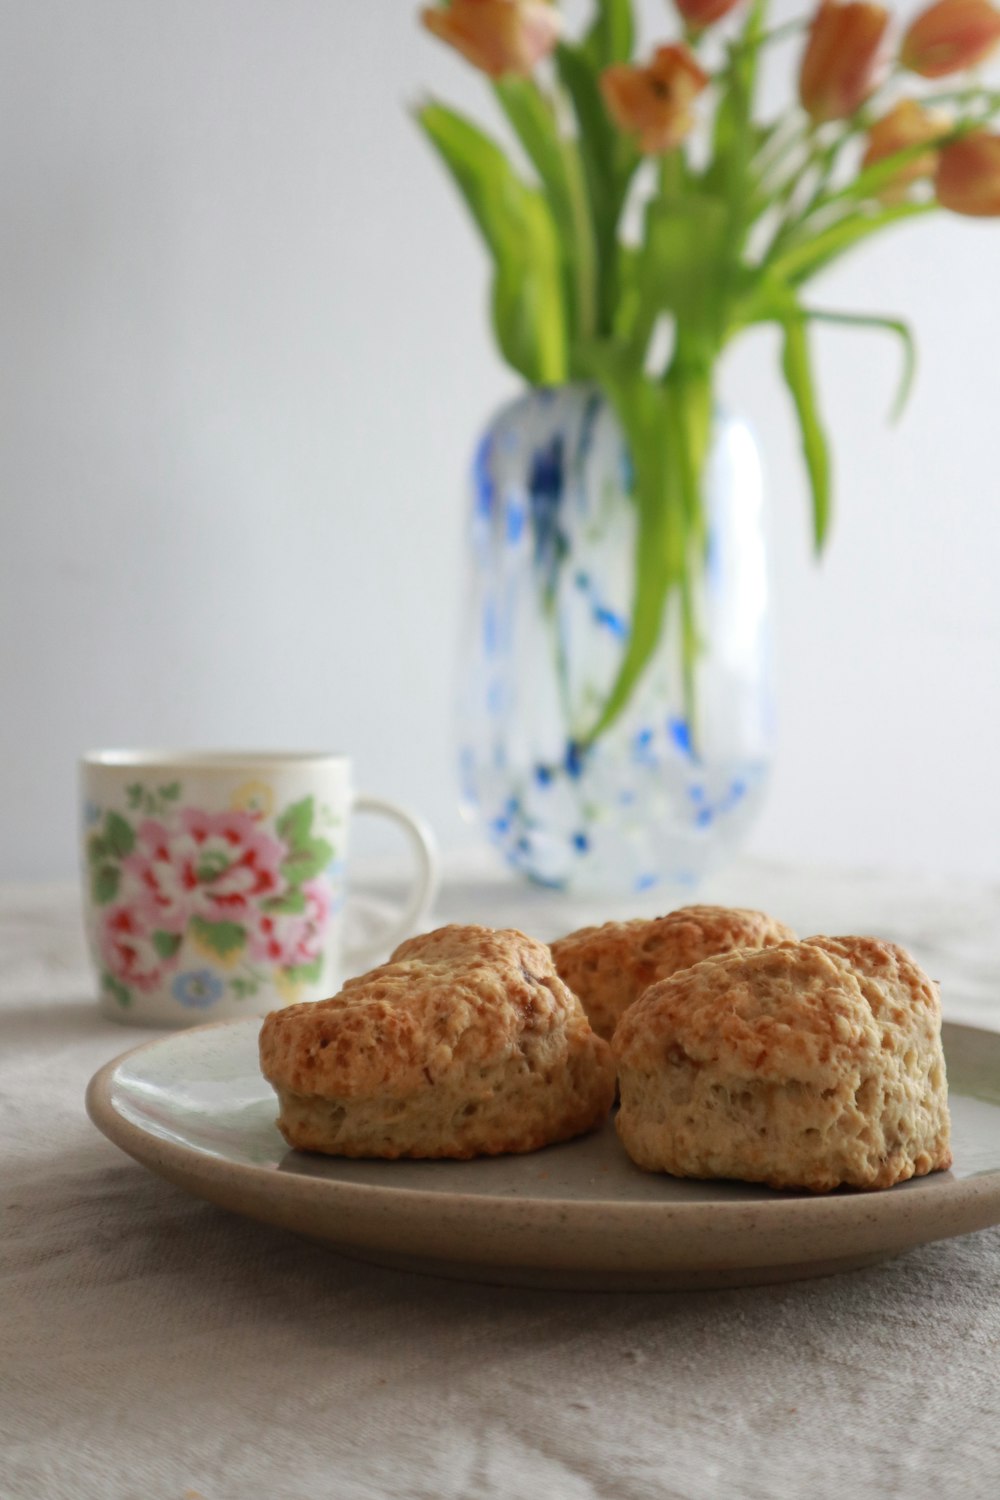 two biscuits on a plate next to a vase of flowers